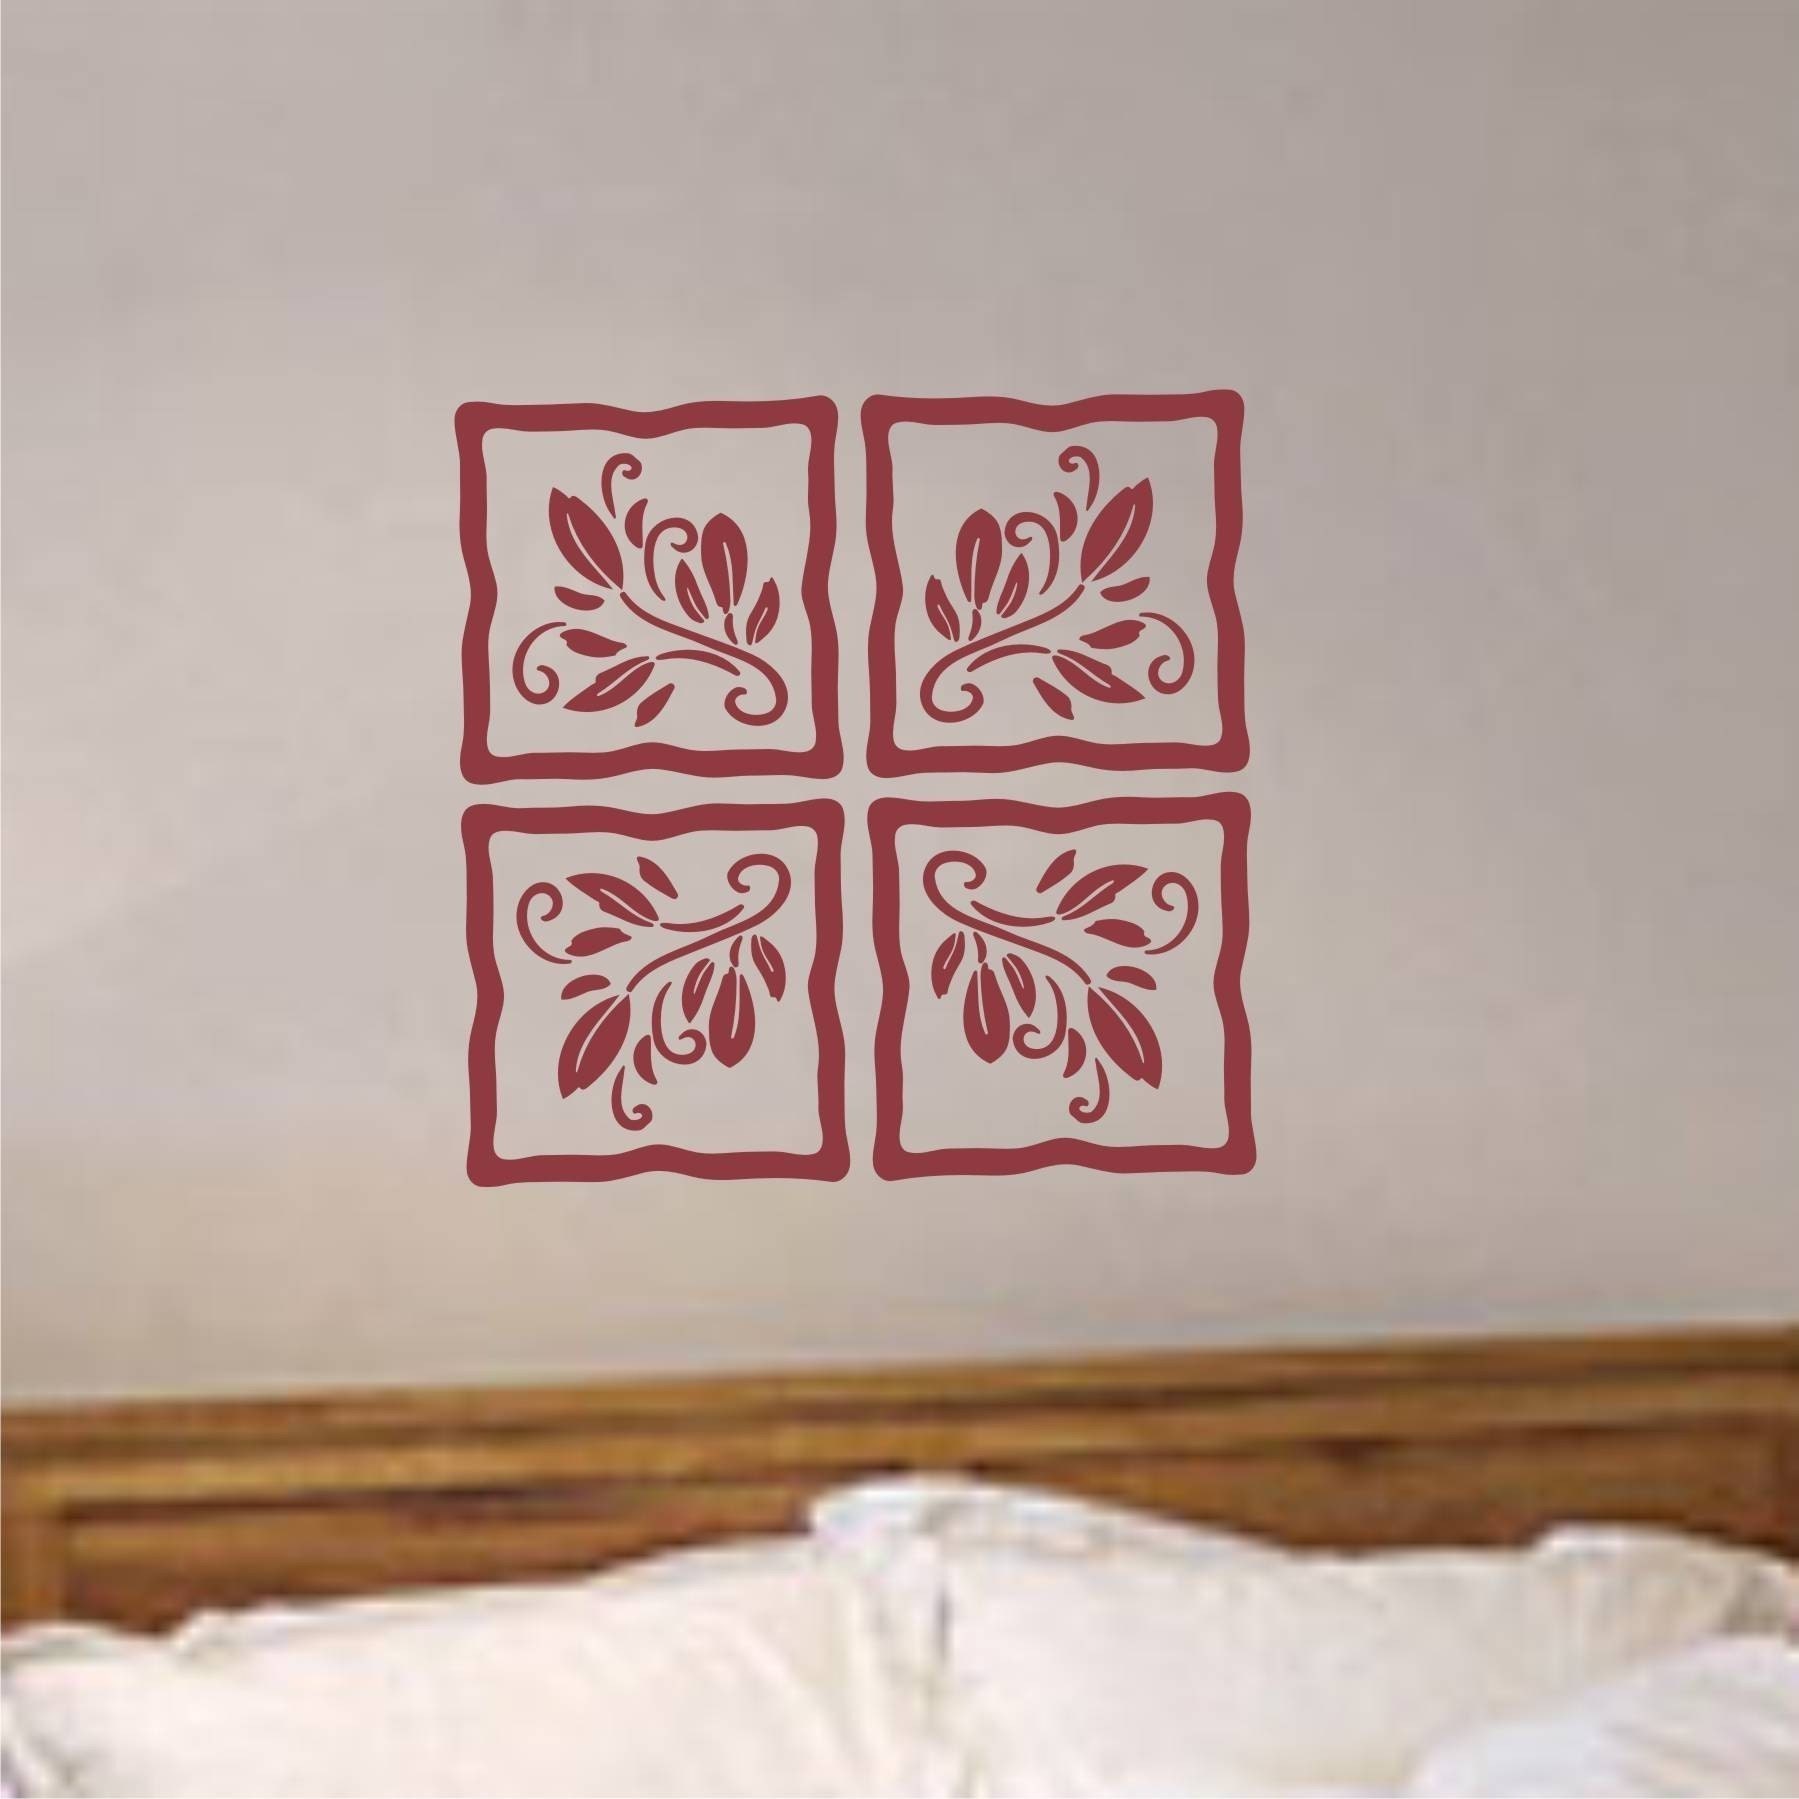 Floral Motif Squares - Vinyl Wall Art Decal Graphic Sticker